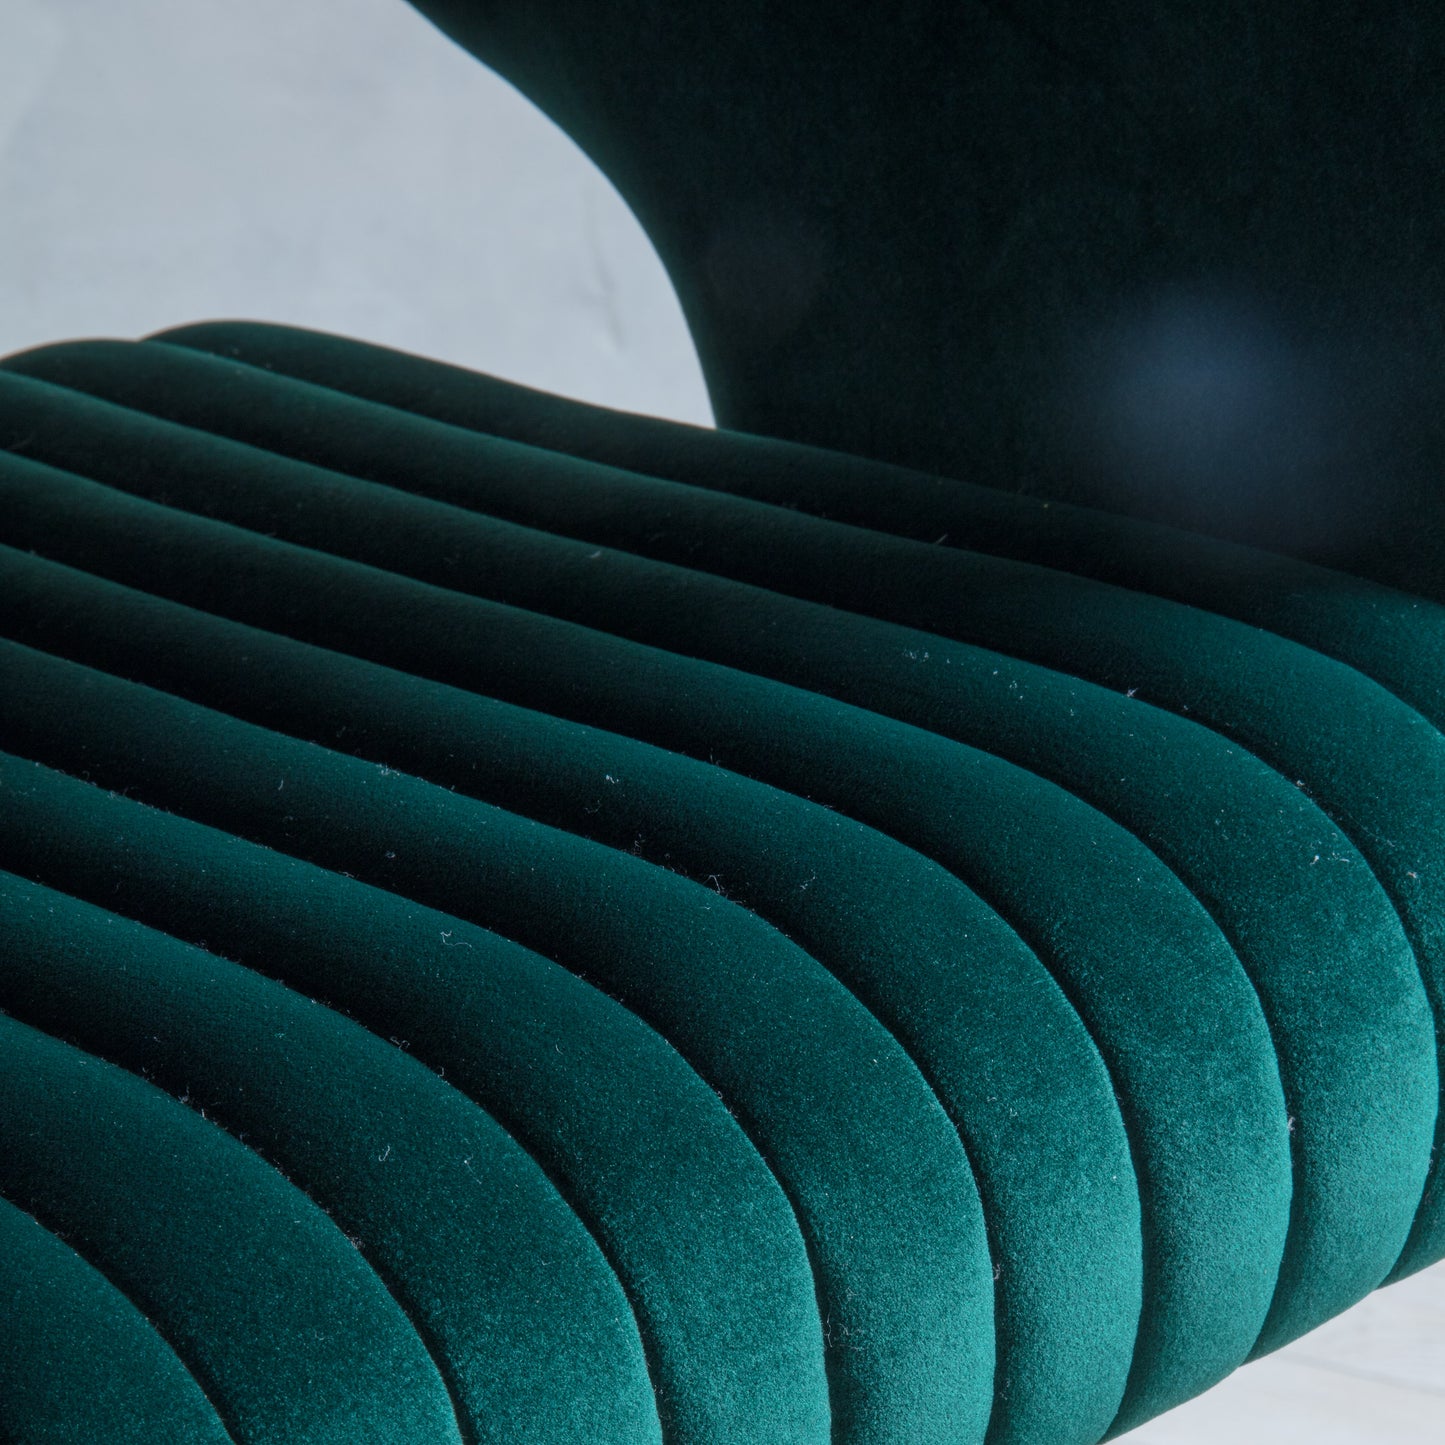 Load image into Gallery viewer, A close up of a Murray Swivel Chair Green Velvet from an online retailer specializing in interior decor and home furniture.
